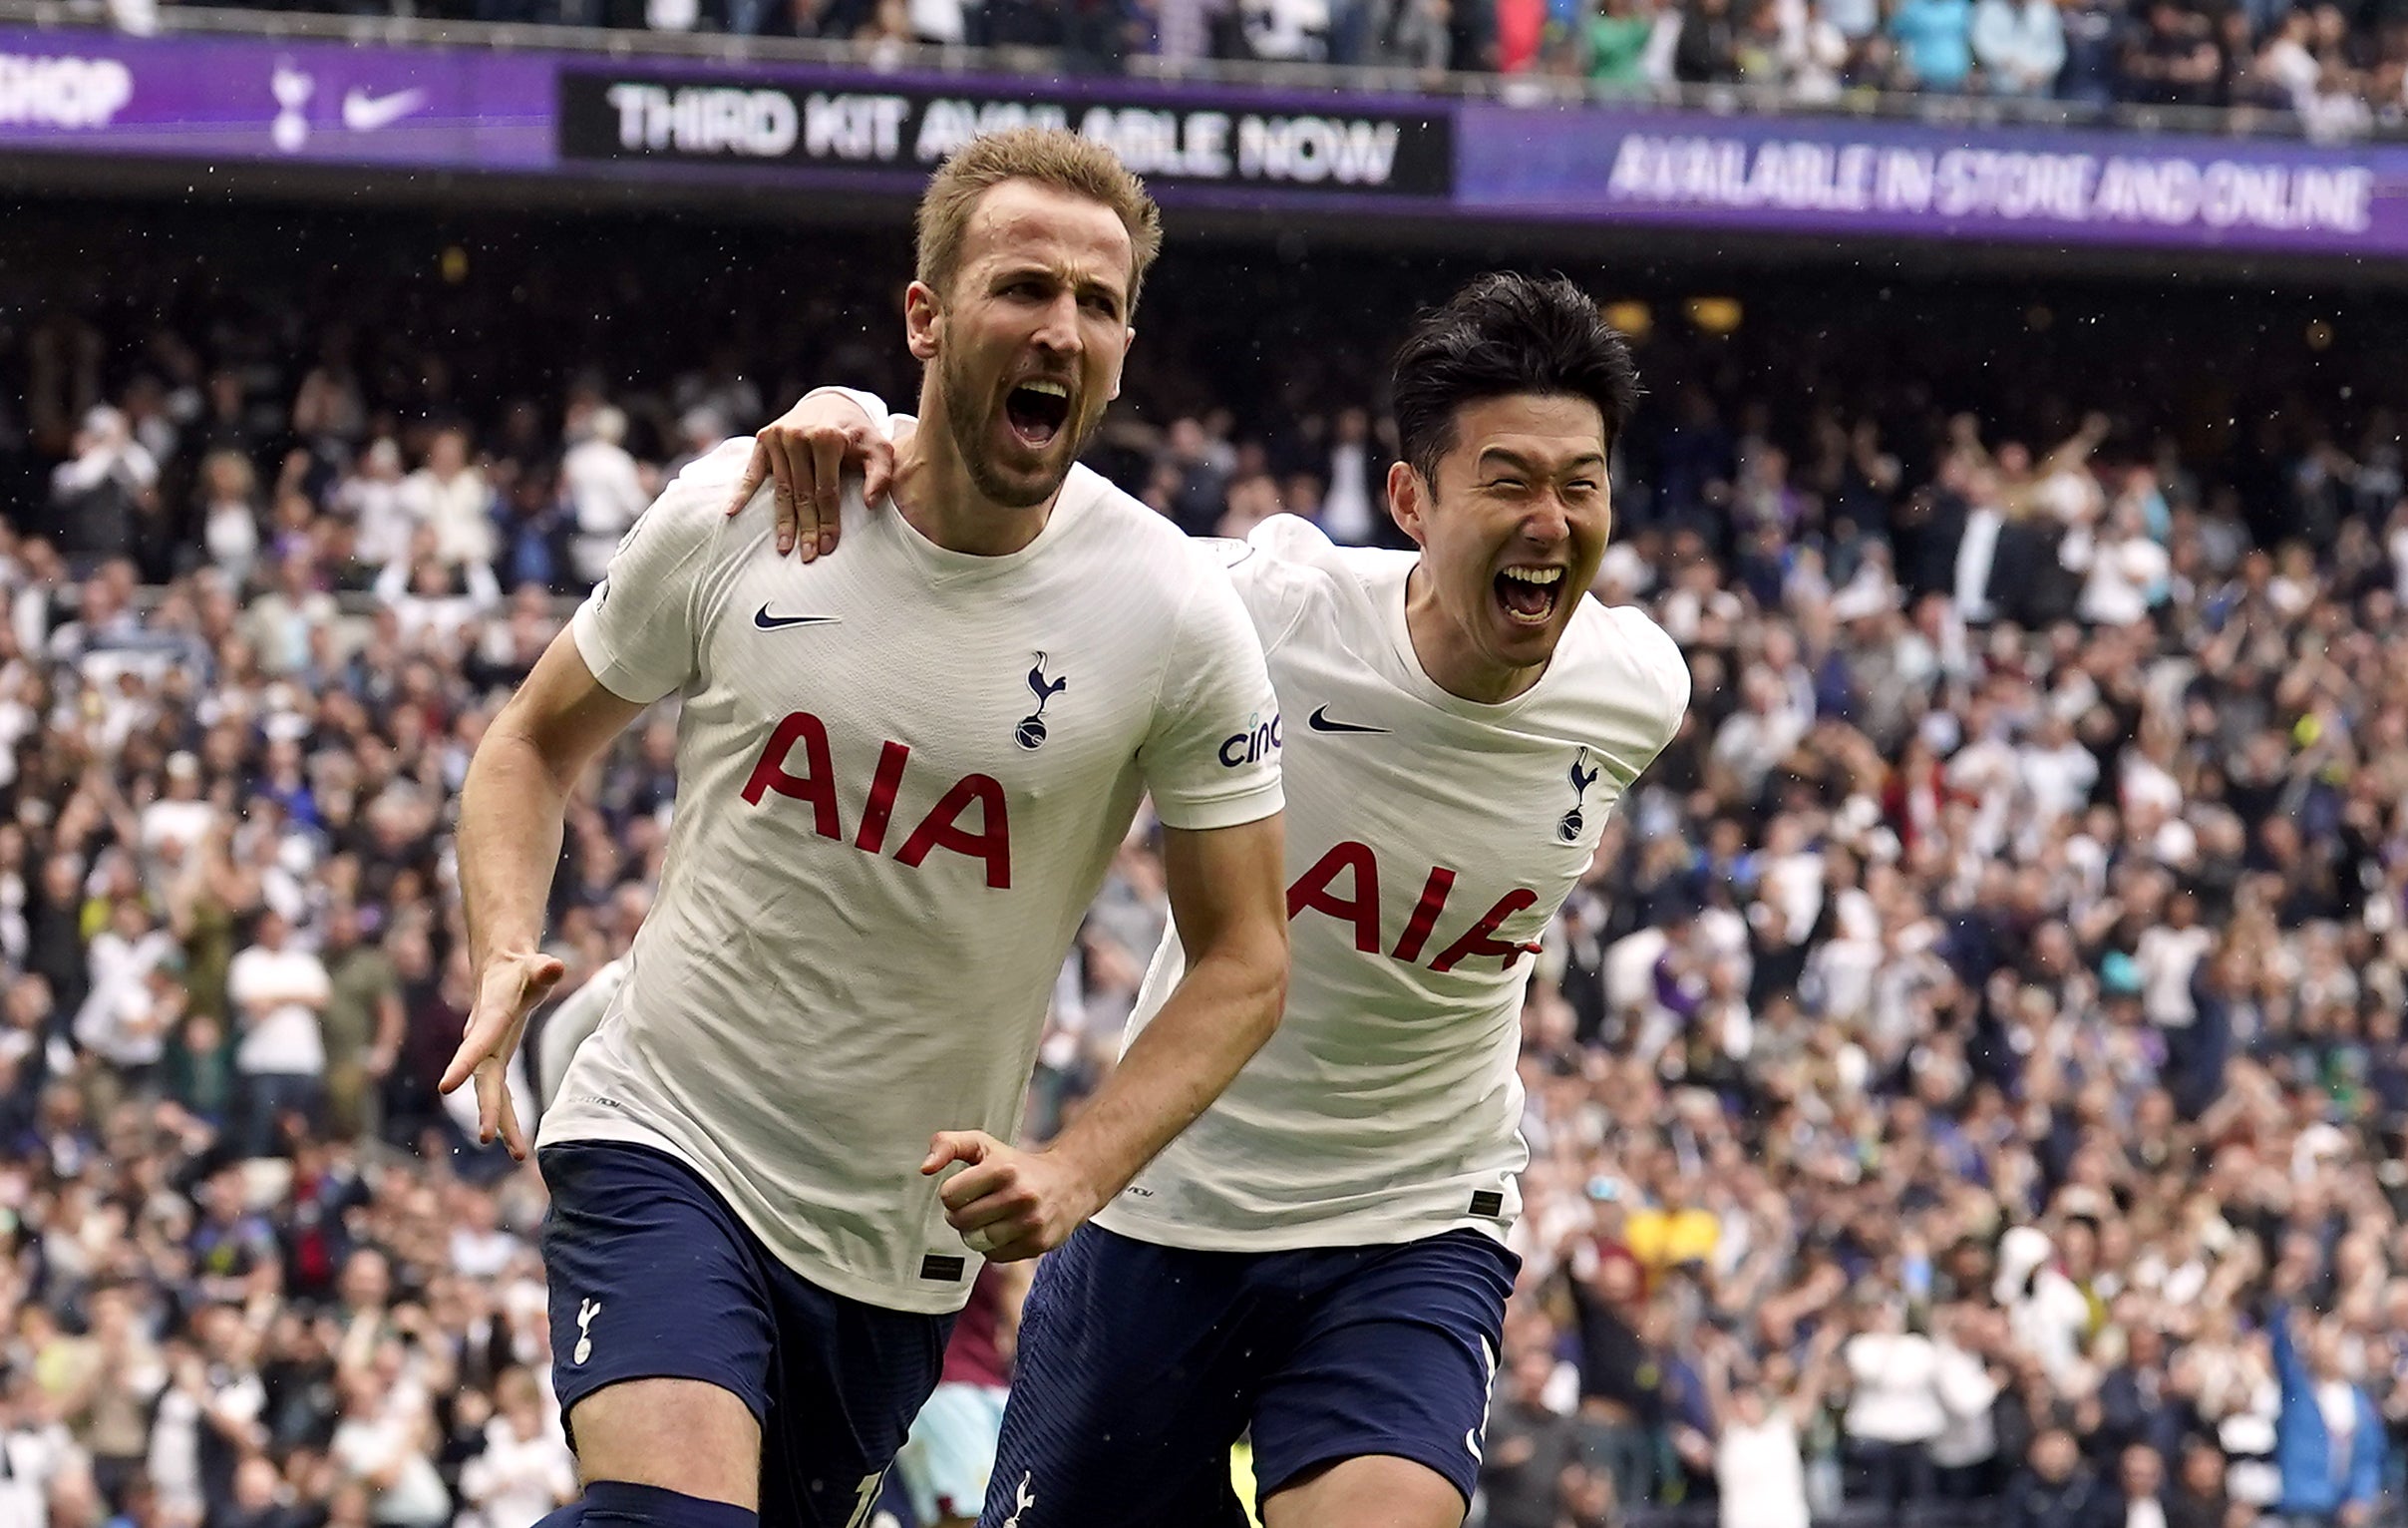 Harry Kane will remain on penalty duties at Norwich, despite Son Heung-min’s pursuit of the Golden Boot (Andrew Matthews/PA)